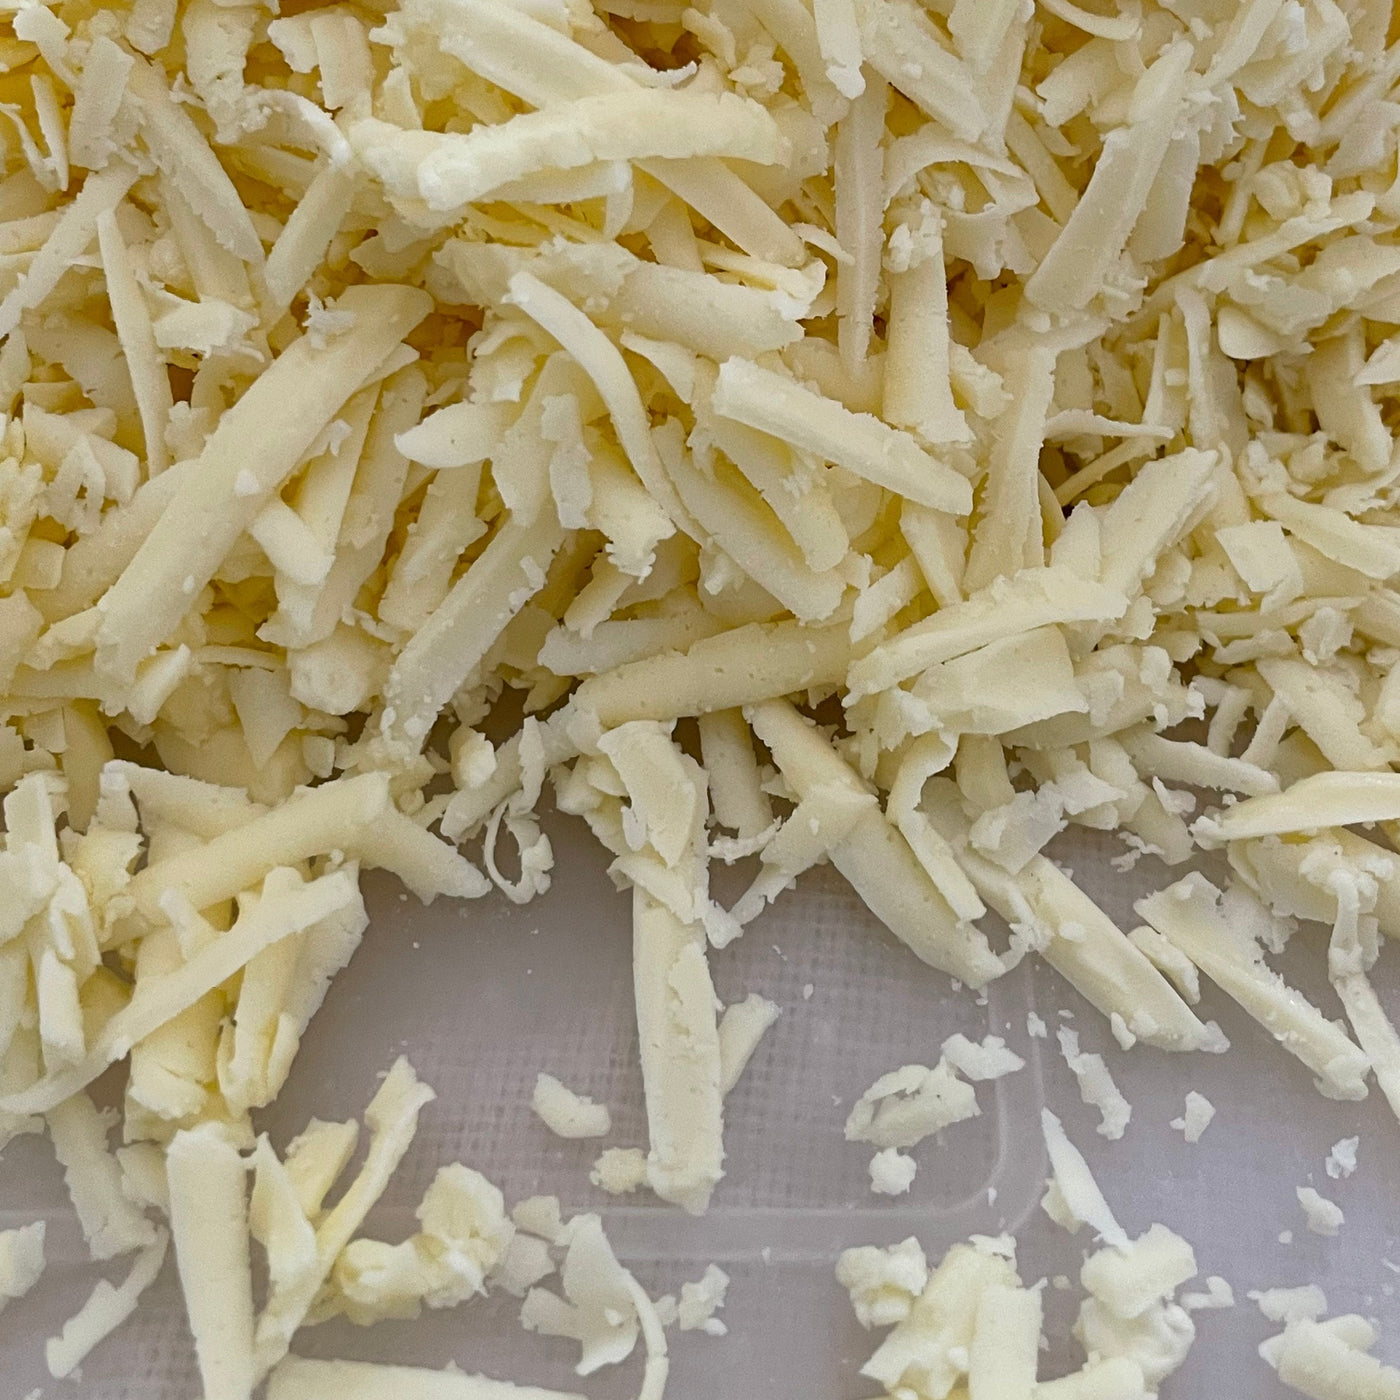 Käse Cotija is one of the most popular Mexican cheese. It is made with cows milk and has a distinct salty flavour.  Made locally with no preservatives, all natural. Ships across India.